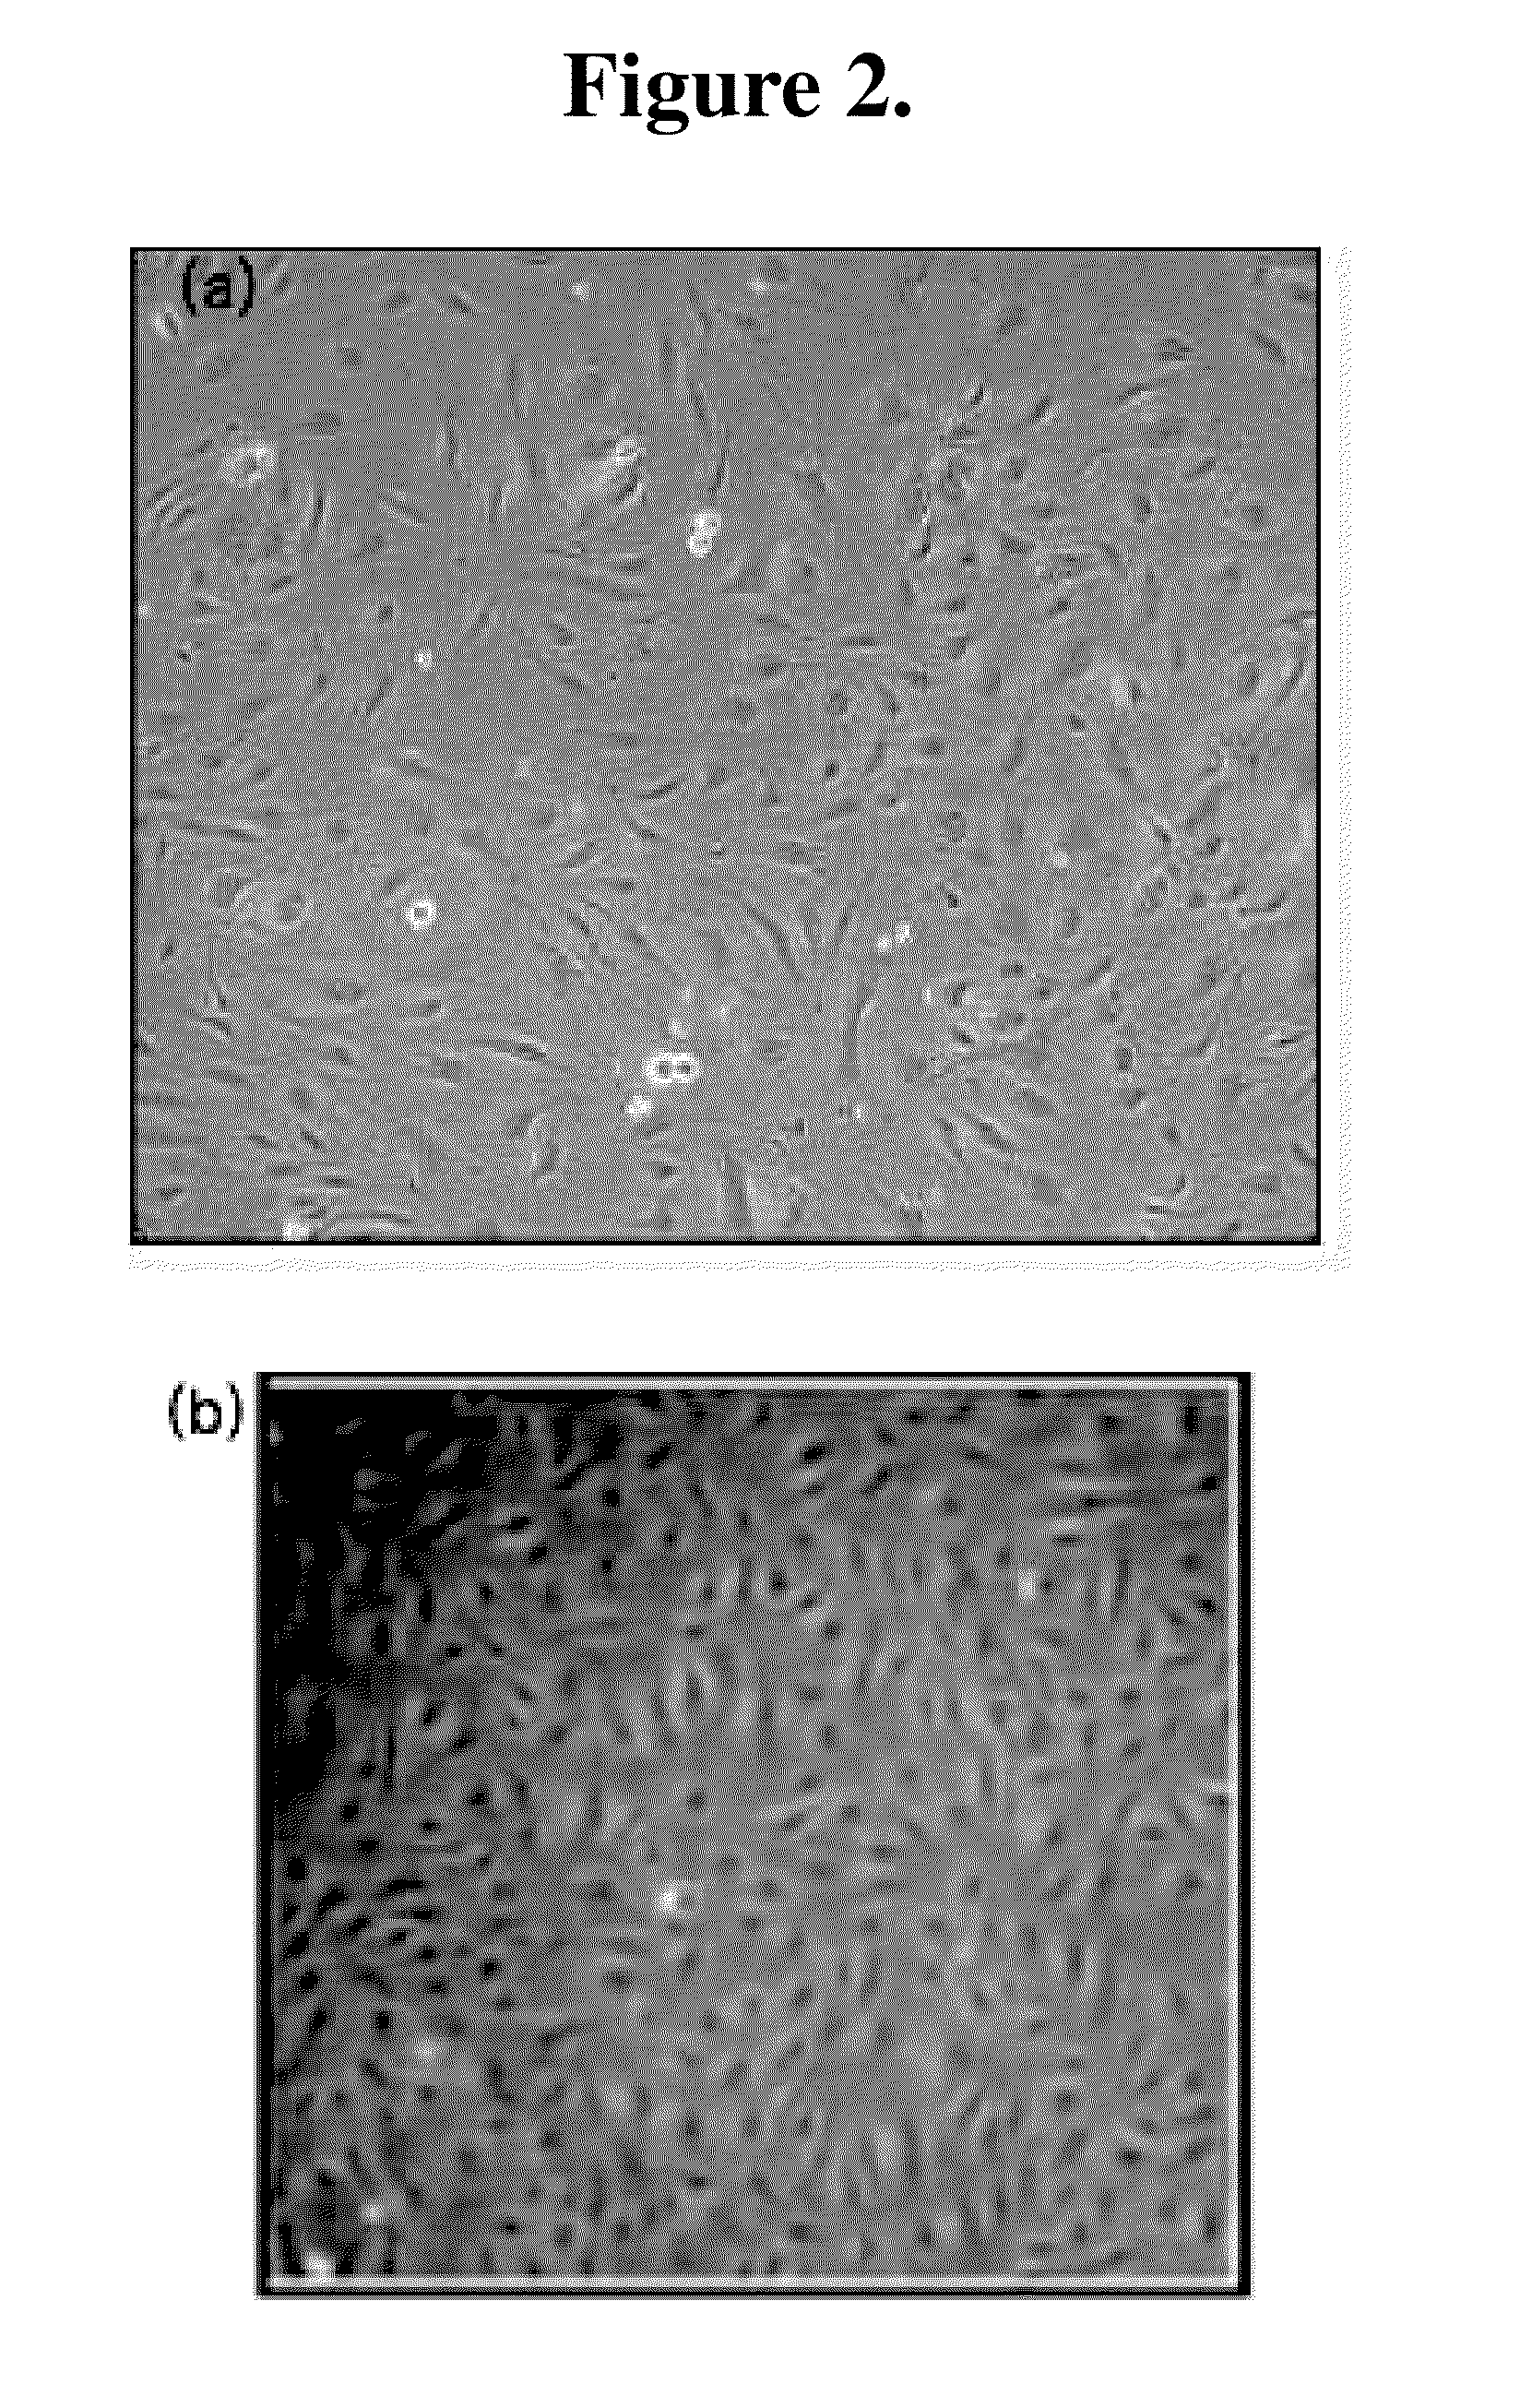 Method for Preventing and Treating the Disease Caused by Vascular Damage and the Use Thereof